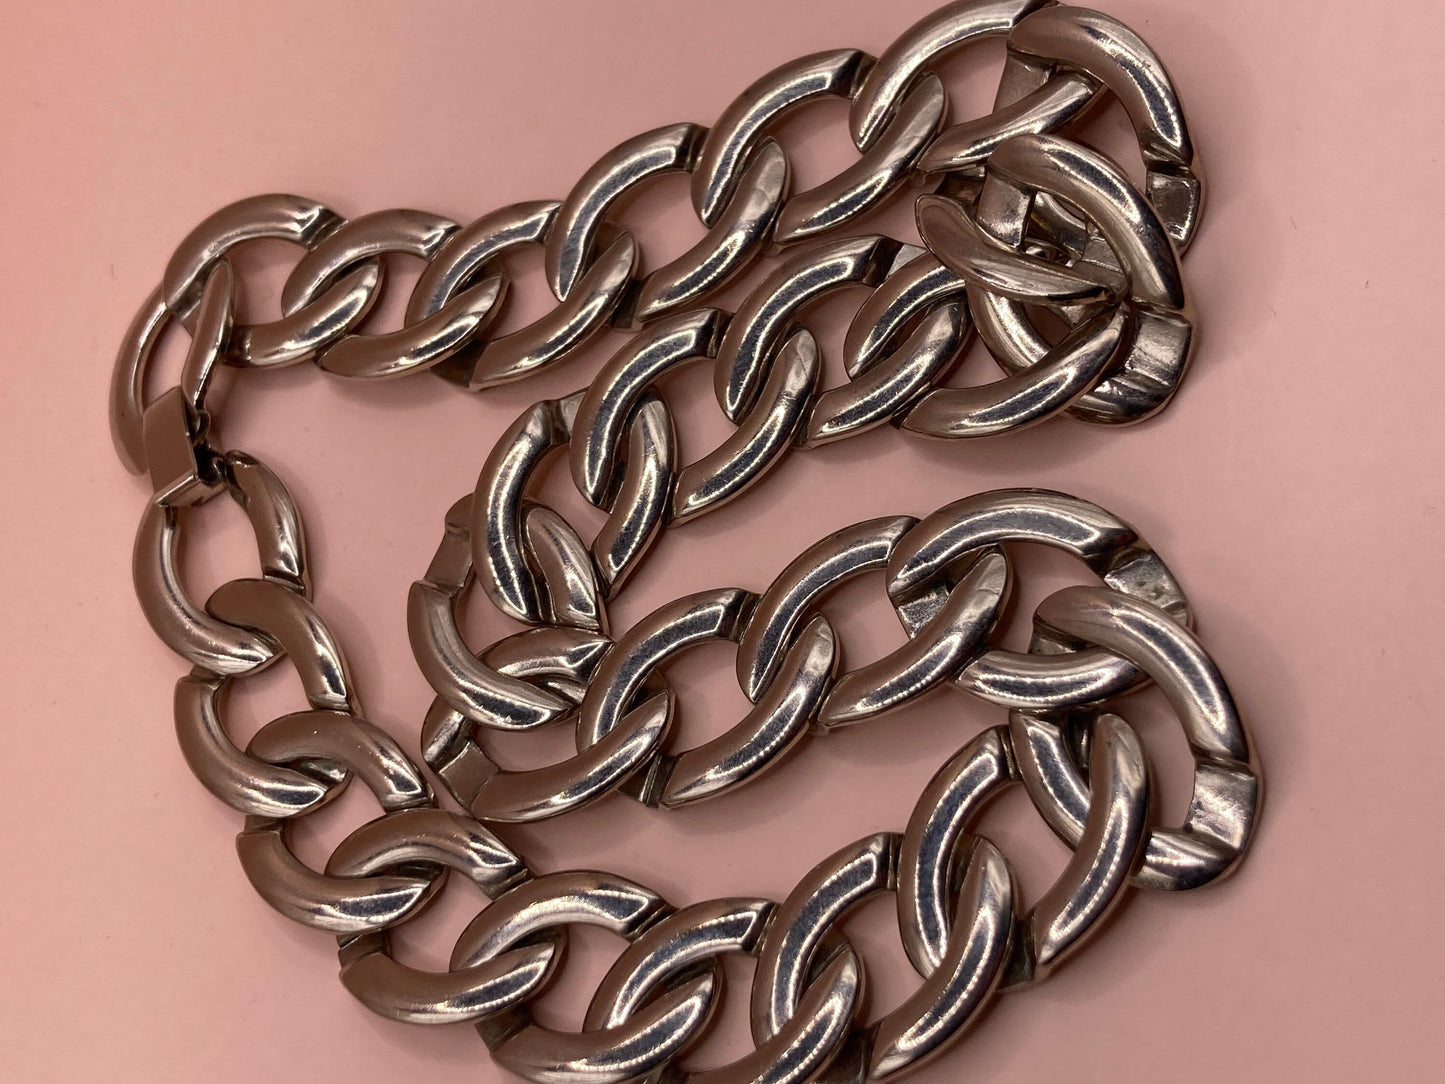 Vintage silver tone Wide chain Link Choker Collar necklace 1980s